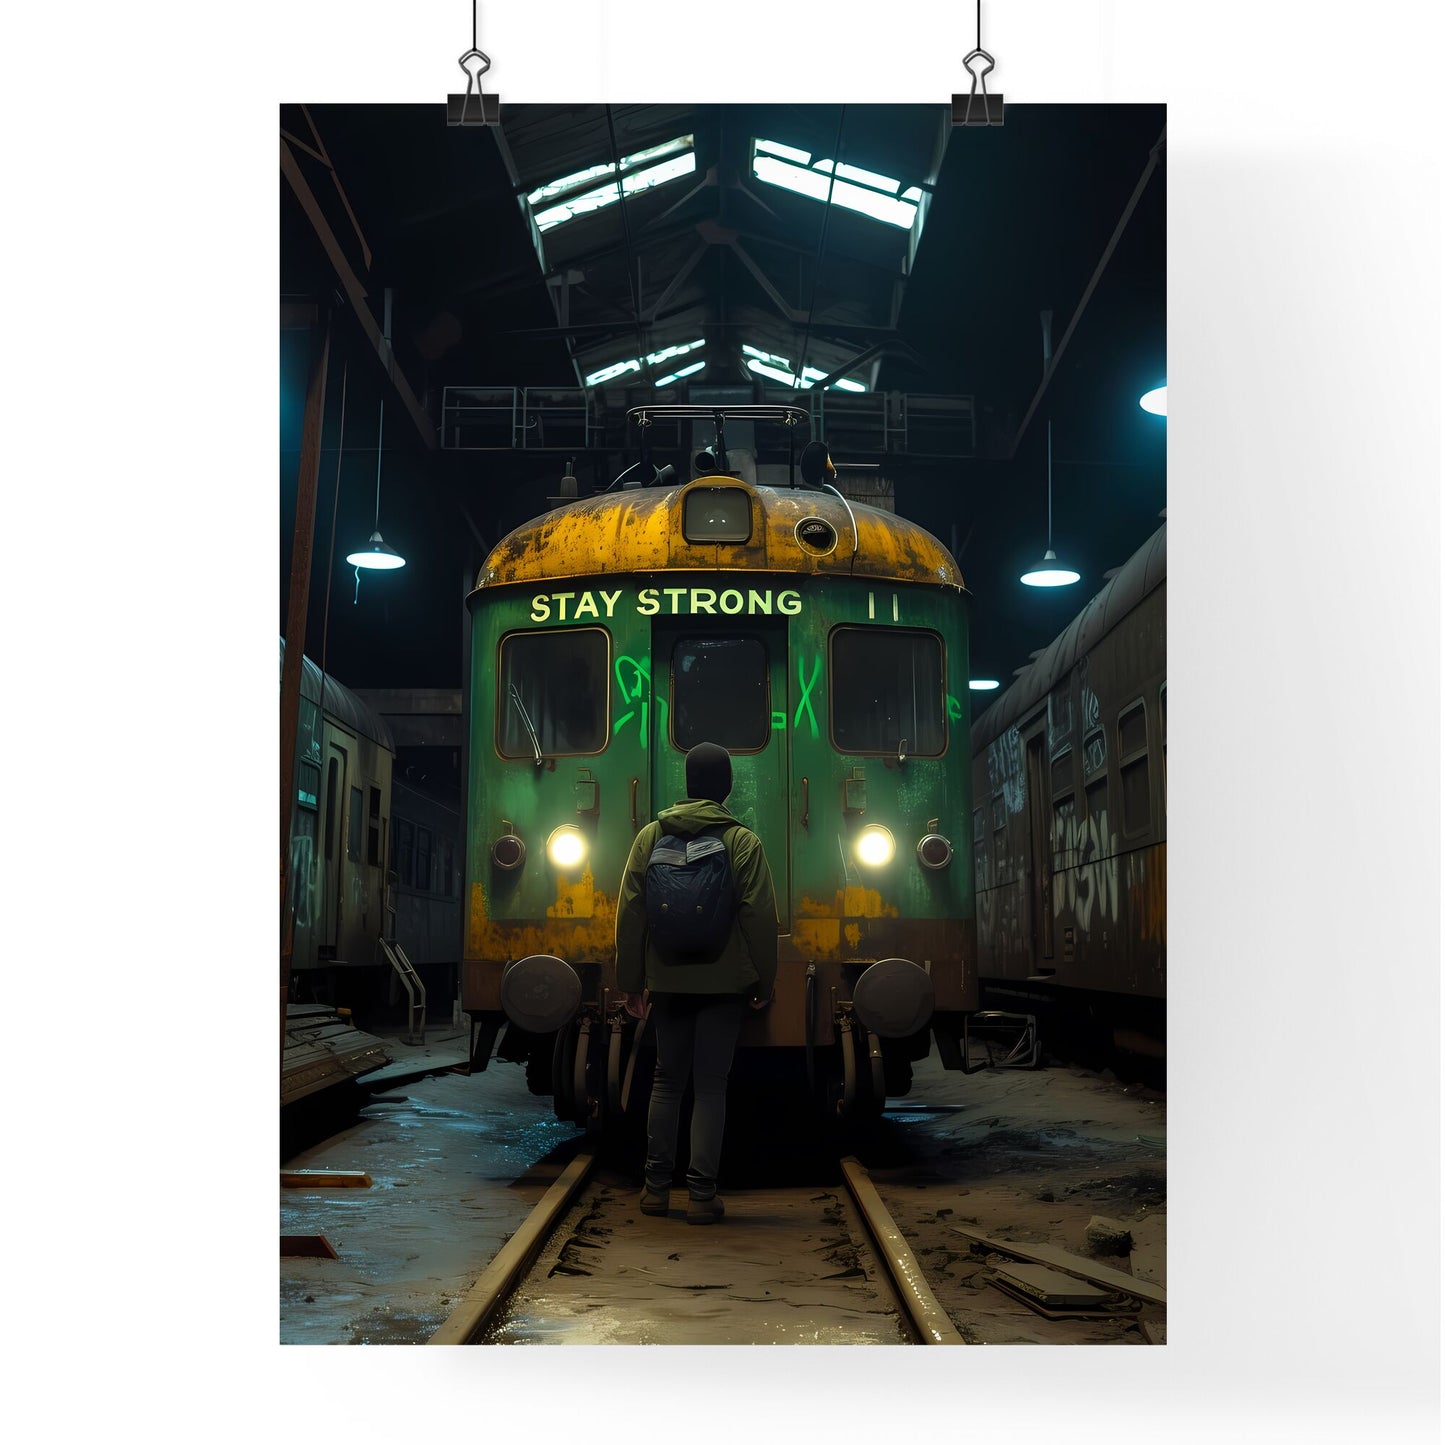 A new york train with the words spray painted STAY STRONG on it in eletric lime green, vintage poster design - Art print of a man standing in front of a train Default Title